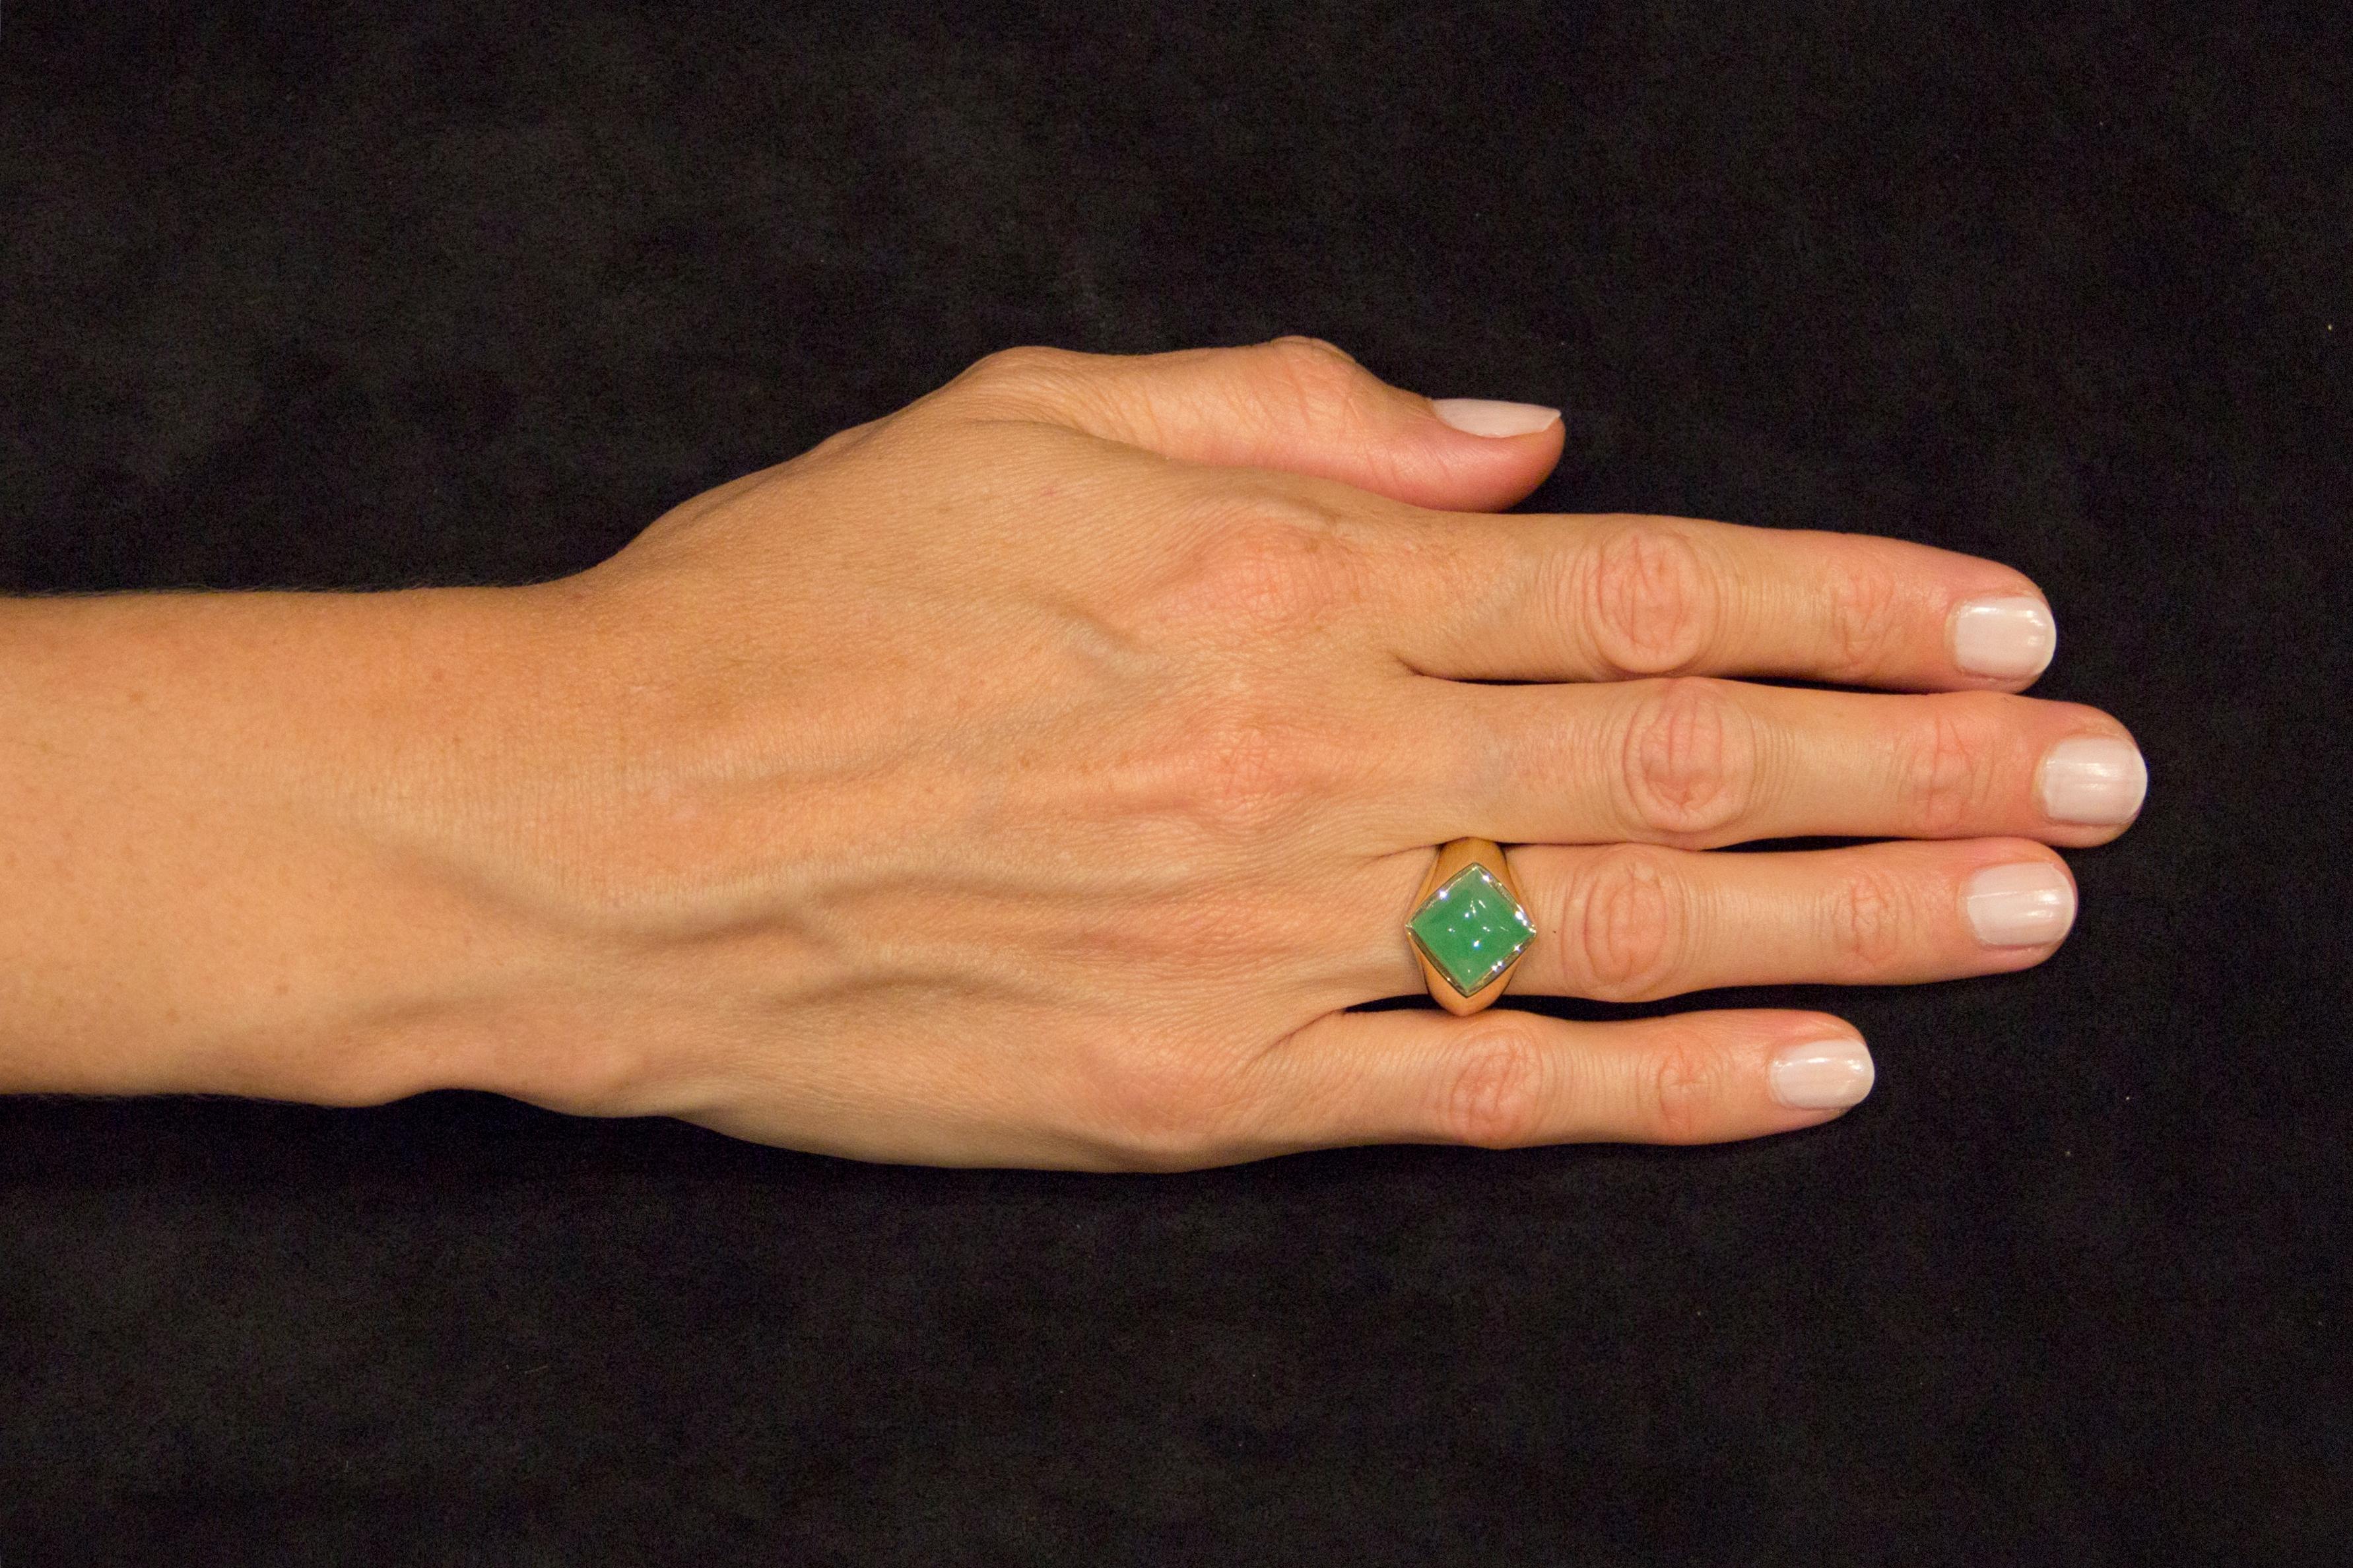 Alex Jona design collection, hand crafted in Italy, 18 karat yellow gold ring set with a sugar loaf Burmese Jade  weighing 4.62 carats. Ring Dimensions:  H 0.97 in x W 0.85 in x D 0.60 in - H 24.8 mm x W 21.6 mm x D 15.2 mm . 
Alex Jona jewels stand